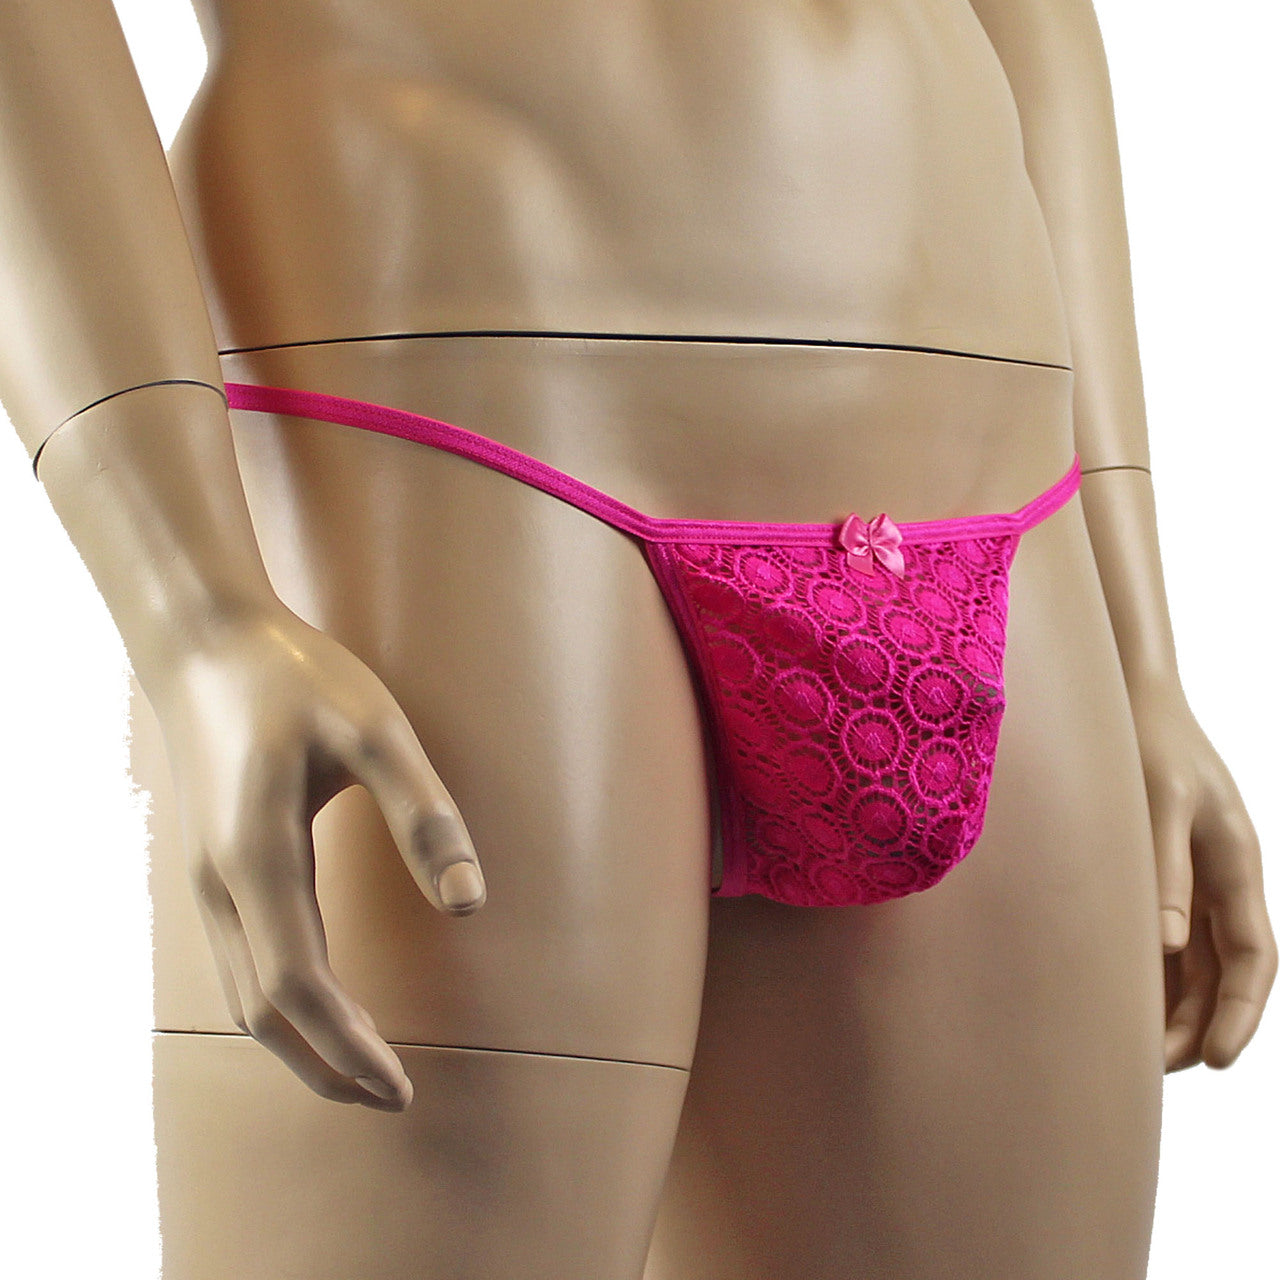 Mens Circle Lace Pouch G string with Cute Bow Front (hot pink plus other colours)